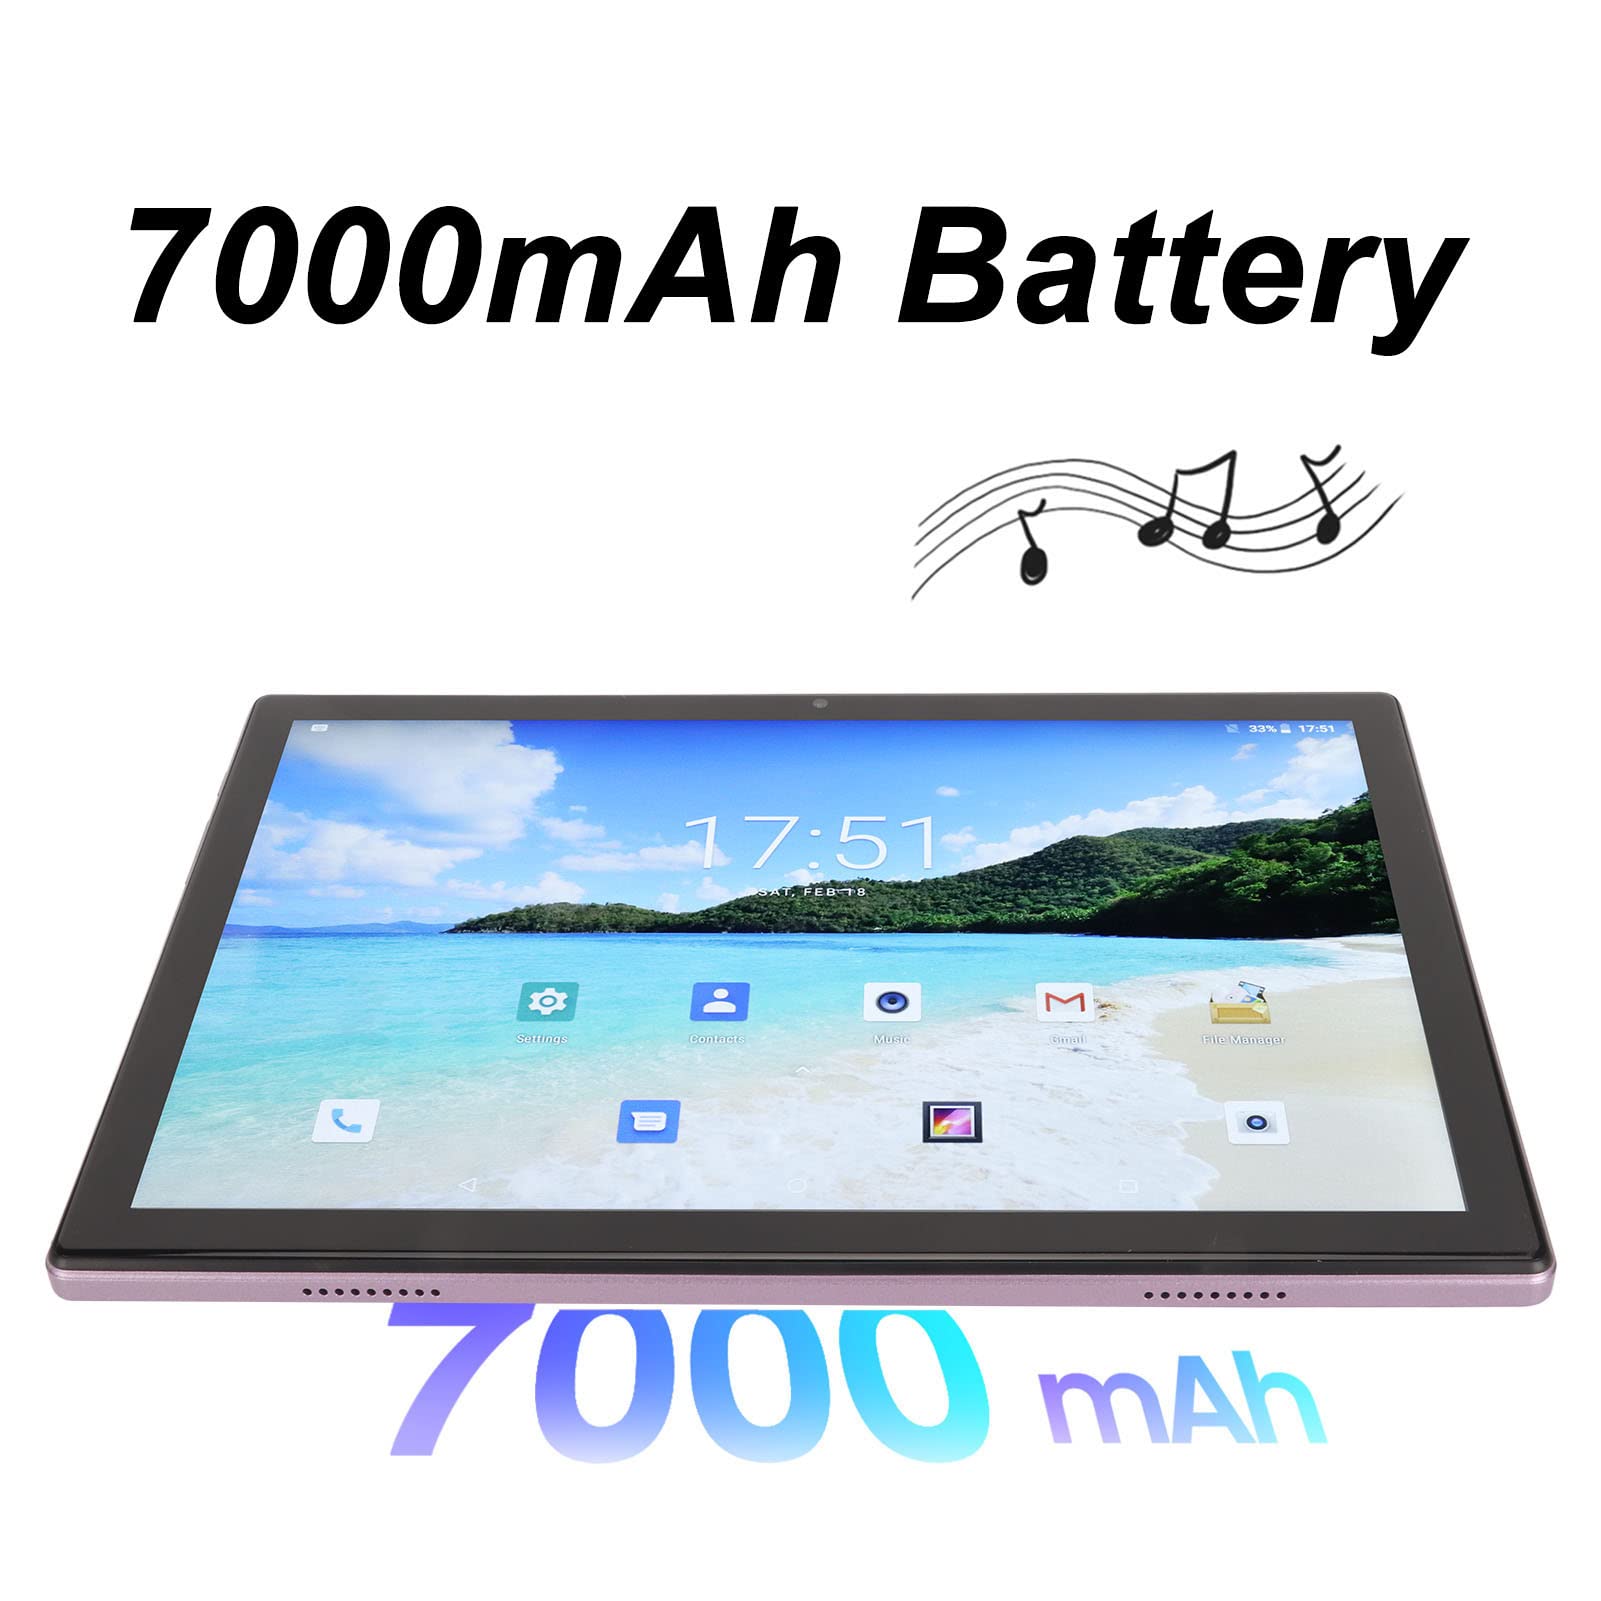 10.1 Inch Business Tablet for Android 12.0, 7000mAh 8GB 256GB FHD Dual Cameras Octa Core, 5G WiFi 4G LTE Calling Cellphone Tablet, for Learning, Working, Office